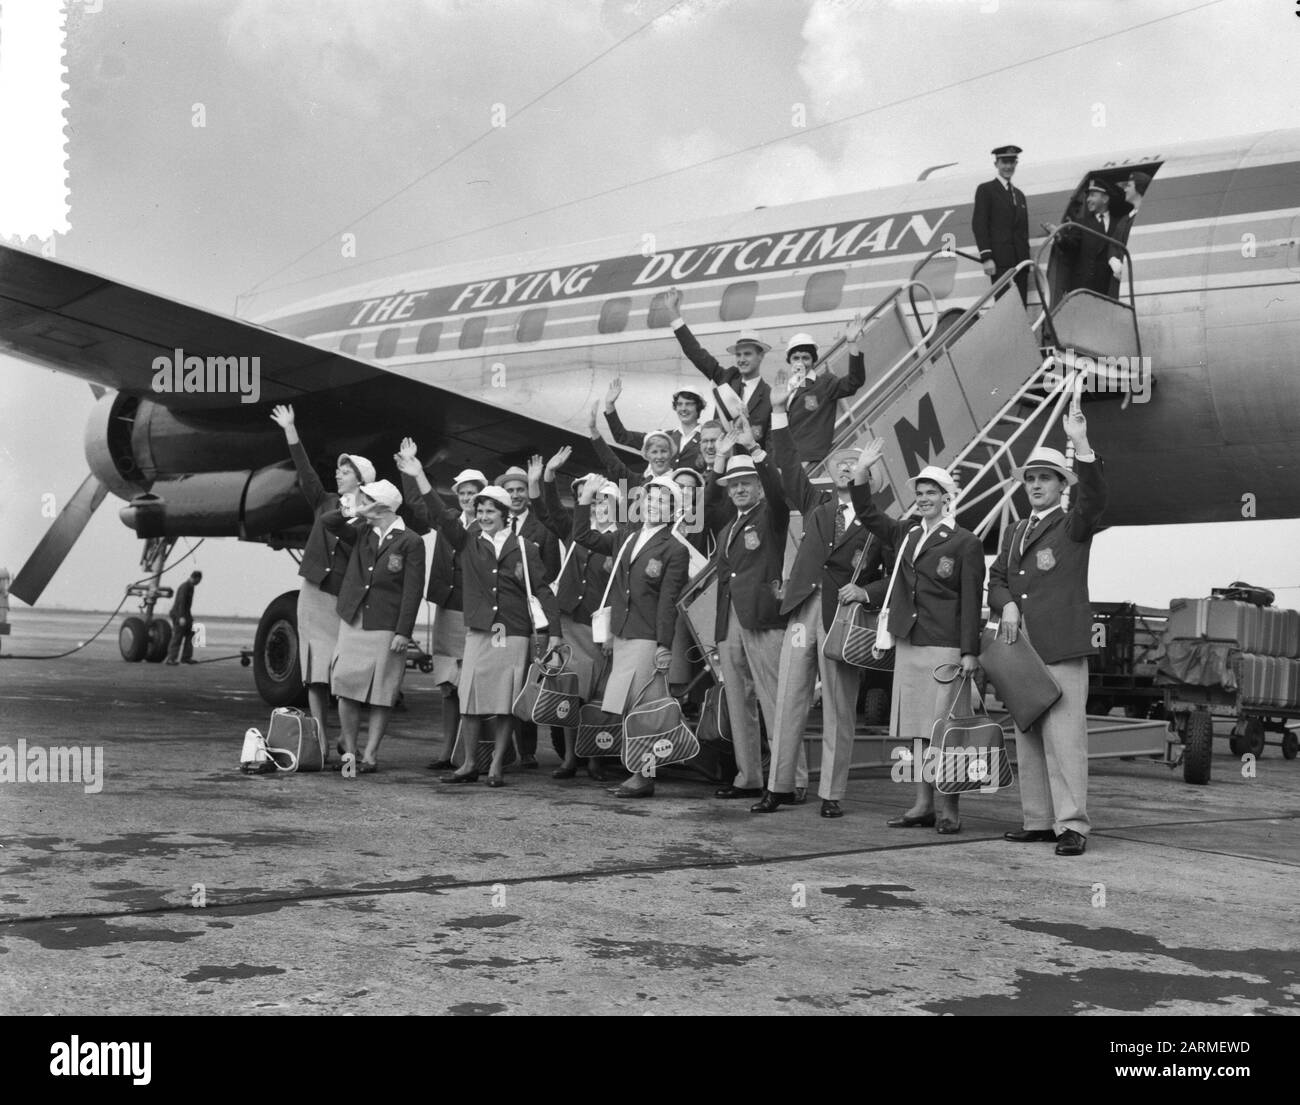 Departure Dutch gymnasts and fencer (star) to Rome as greeting waving the participants to the lagging Date: 29 August 1960 Location: Schiphol Keywords: athletes, airports Stock Photo